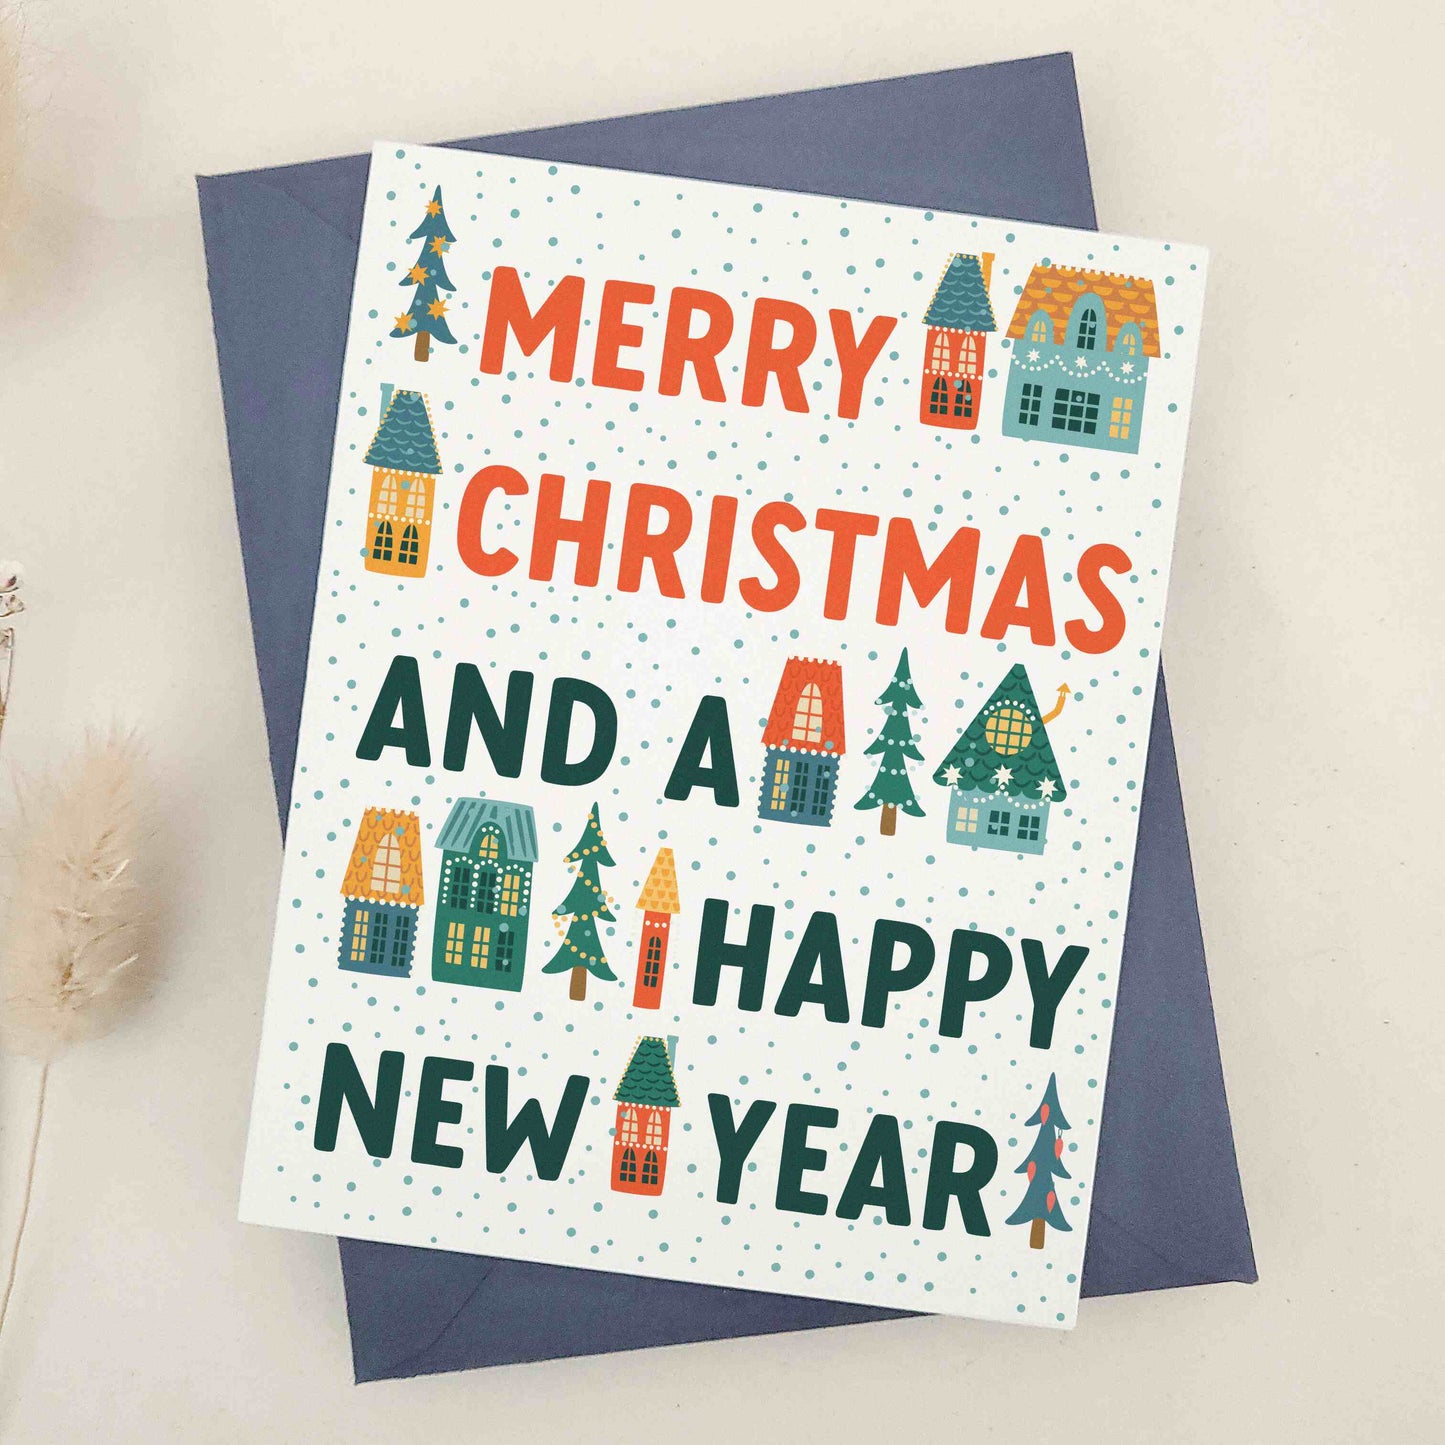 Merry Christmas and a Happy New Year card by XOXOKristen, featuring a picturesque winter village scene with quaint houses and evergreen trees, adorned with vivid colors and whimsical imagery, embodying festive cheer and hopeful spirit.